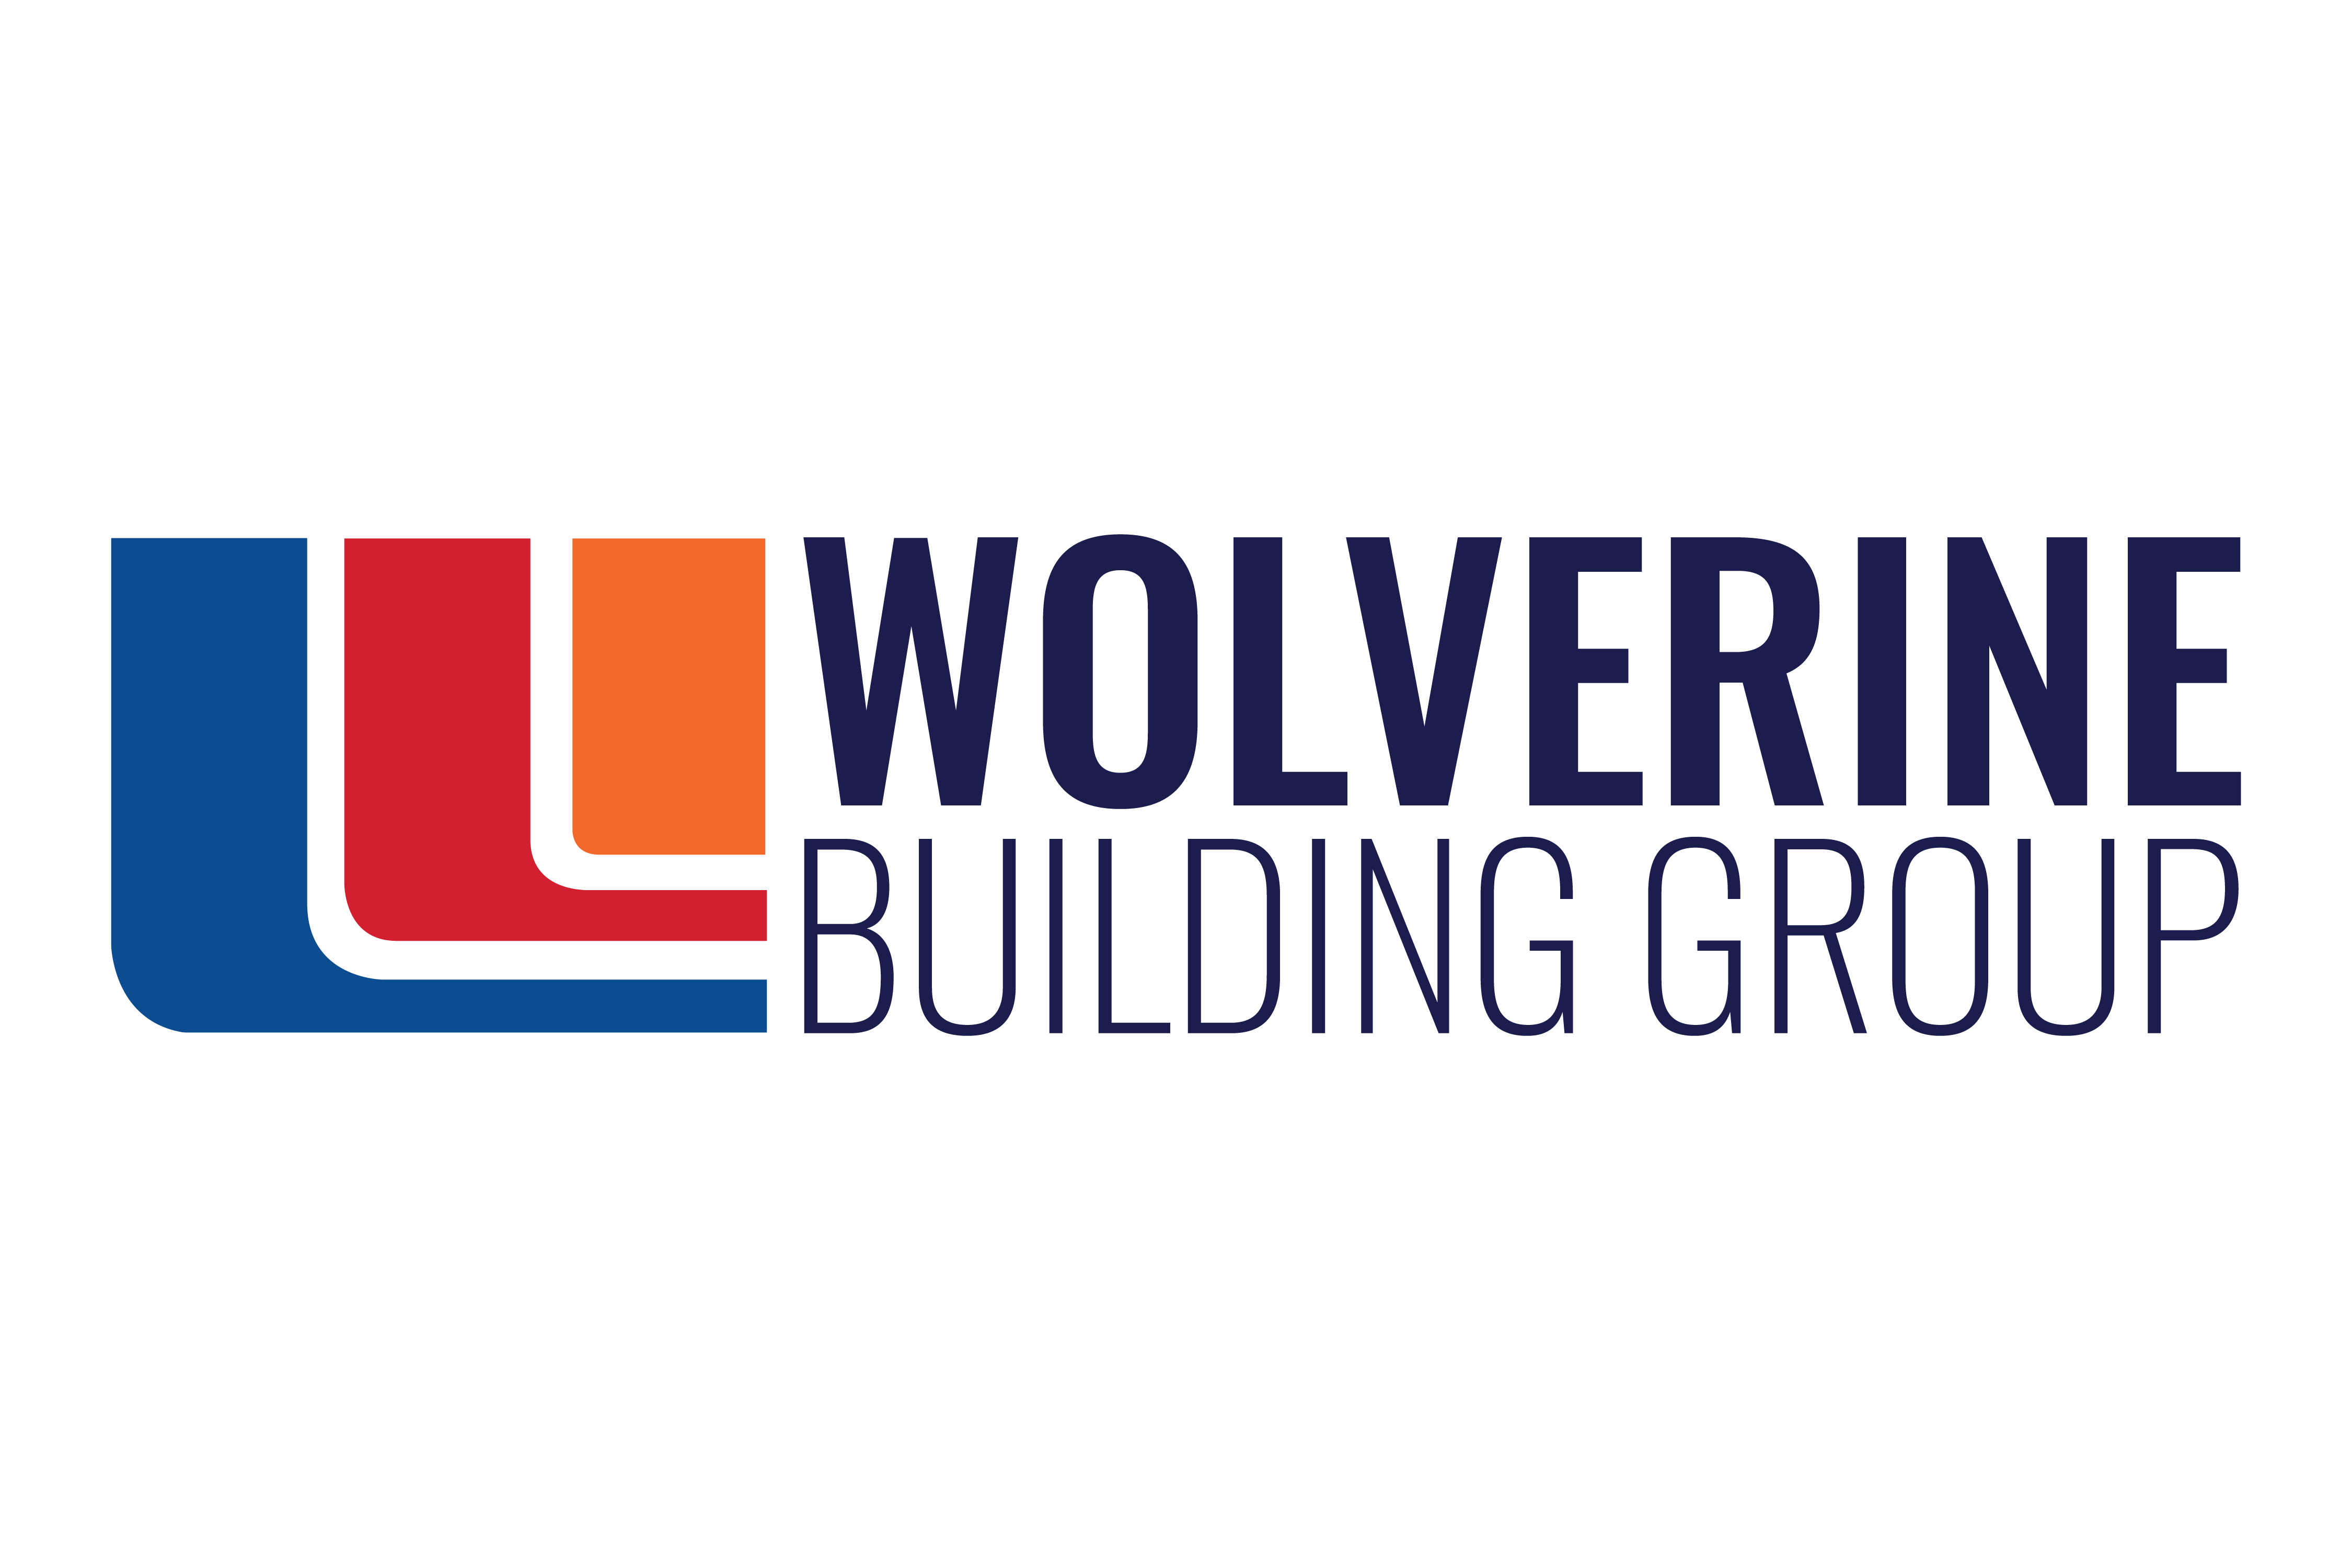 Wolverine Building Group